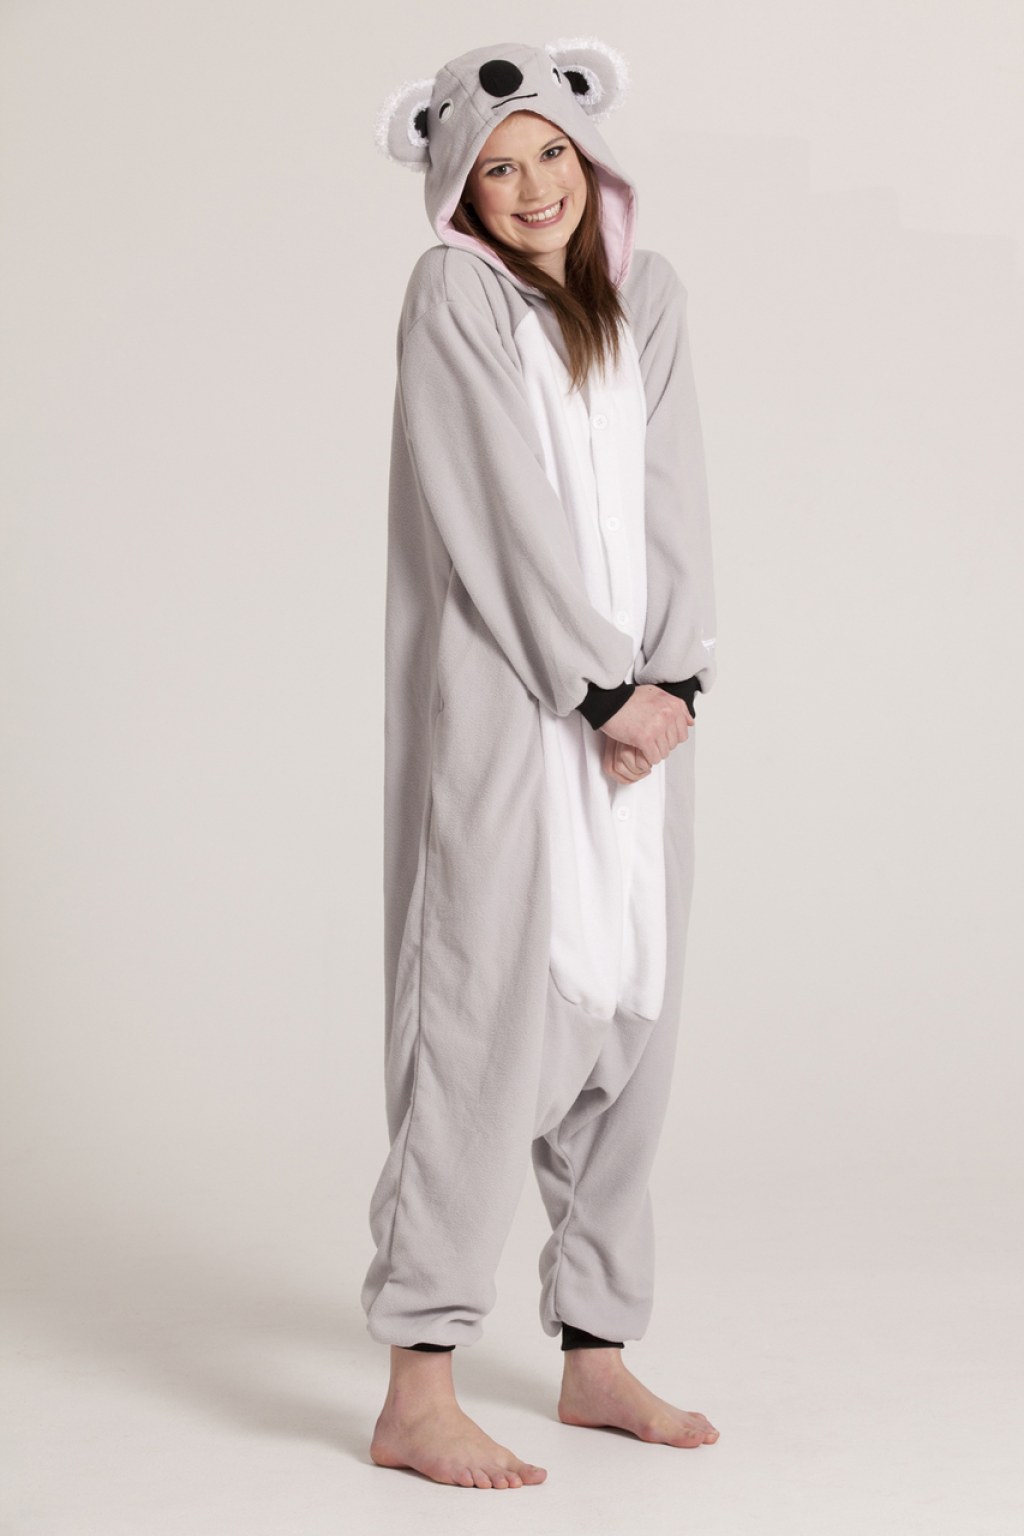 Picture of: The essential guide to wearing a onesie – SheKnows